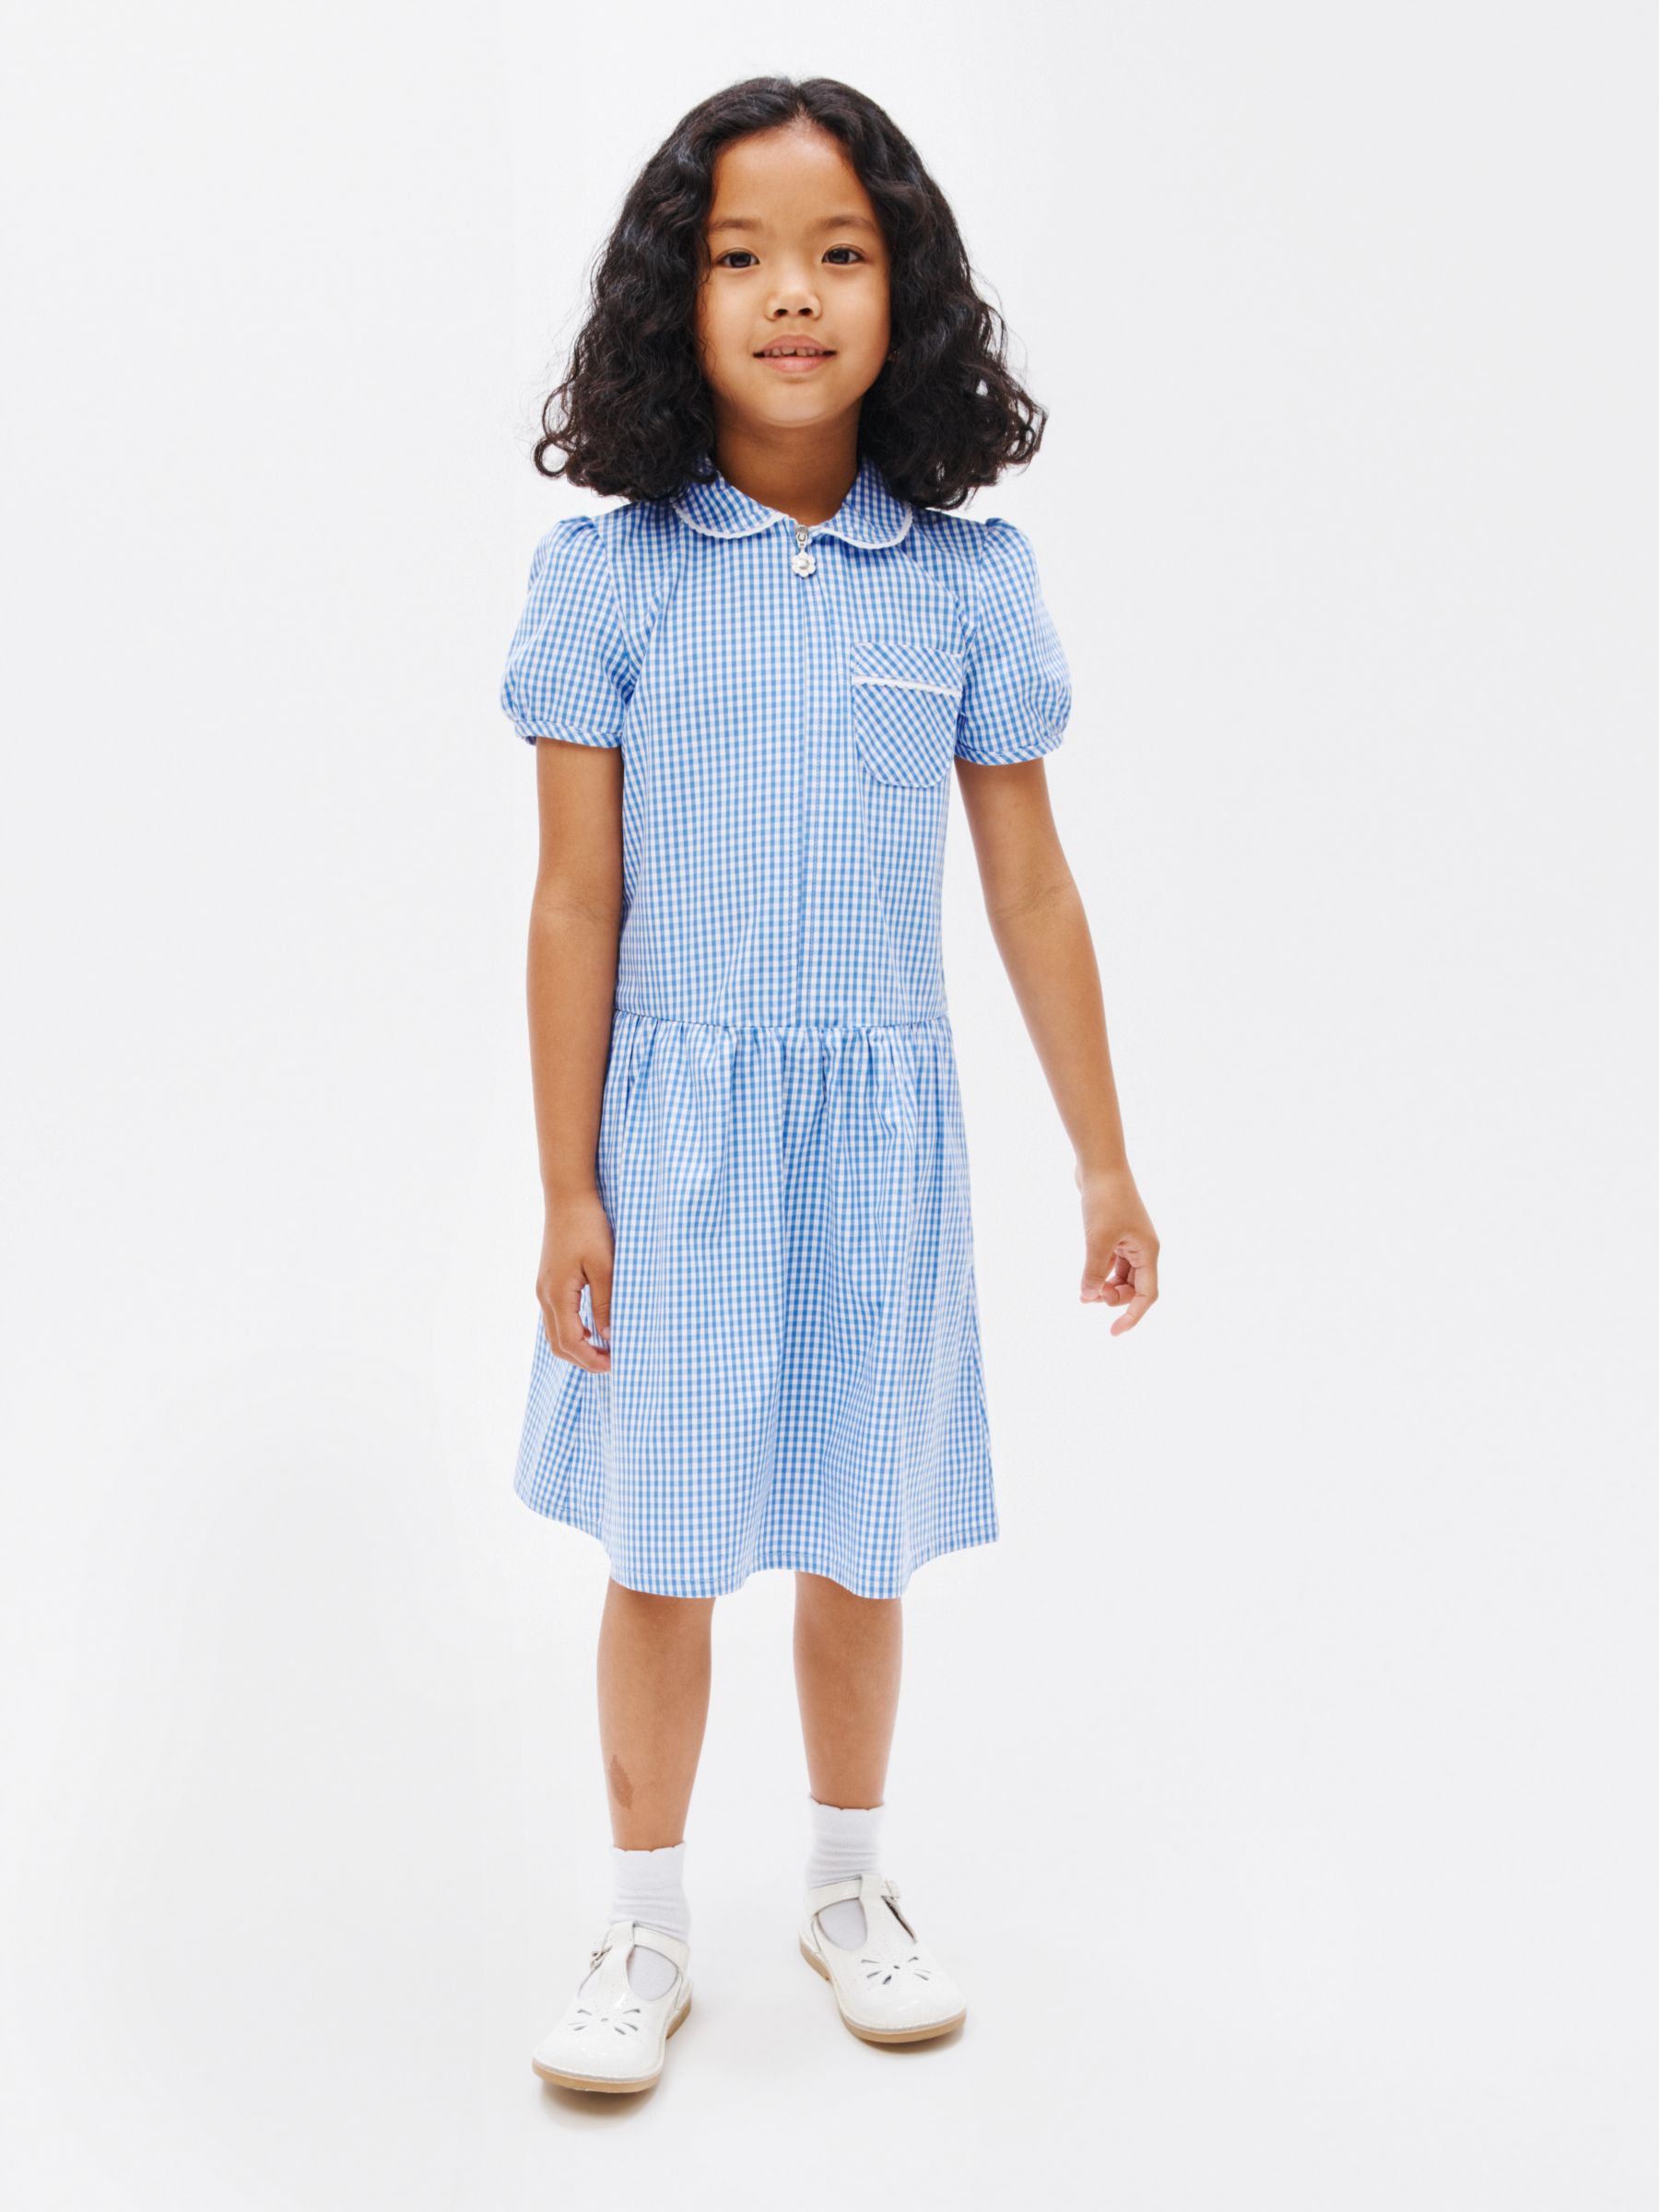 NEW Girl's Red Spot and Striped Dress Age 2 JOHN LEWIS 